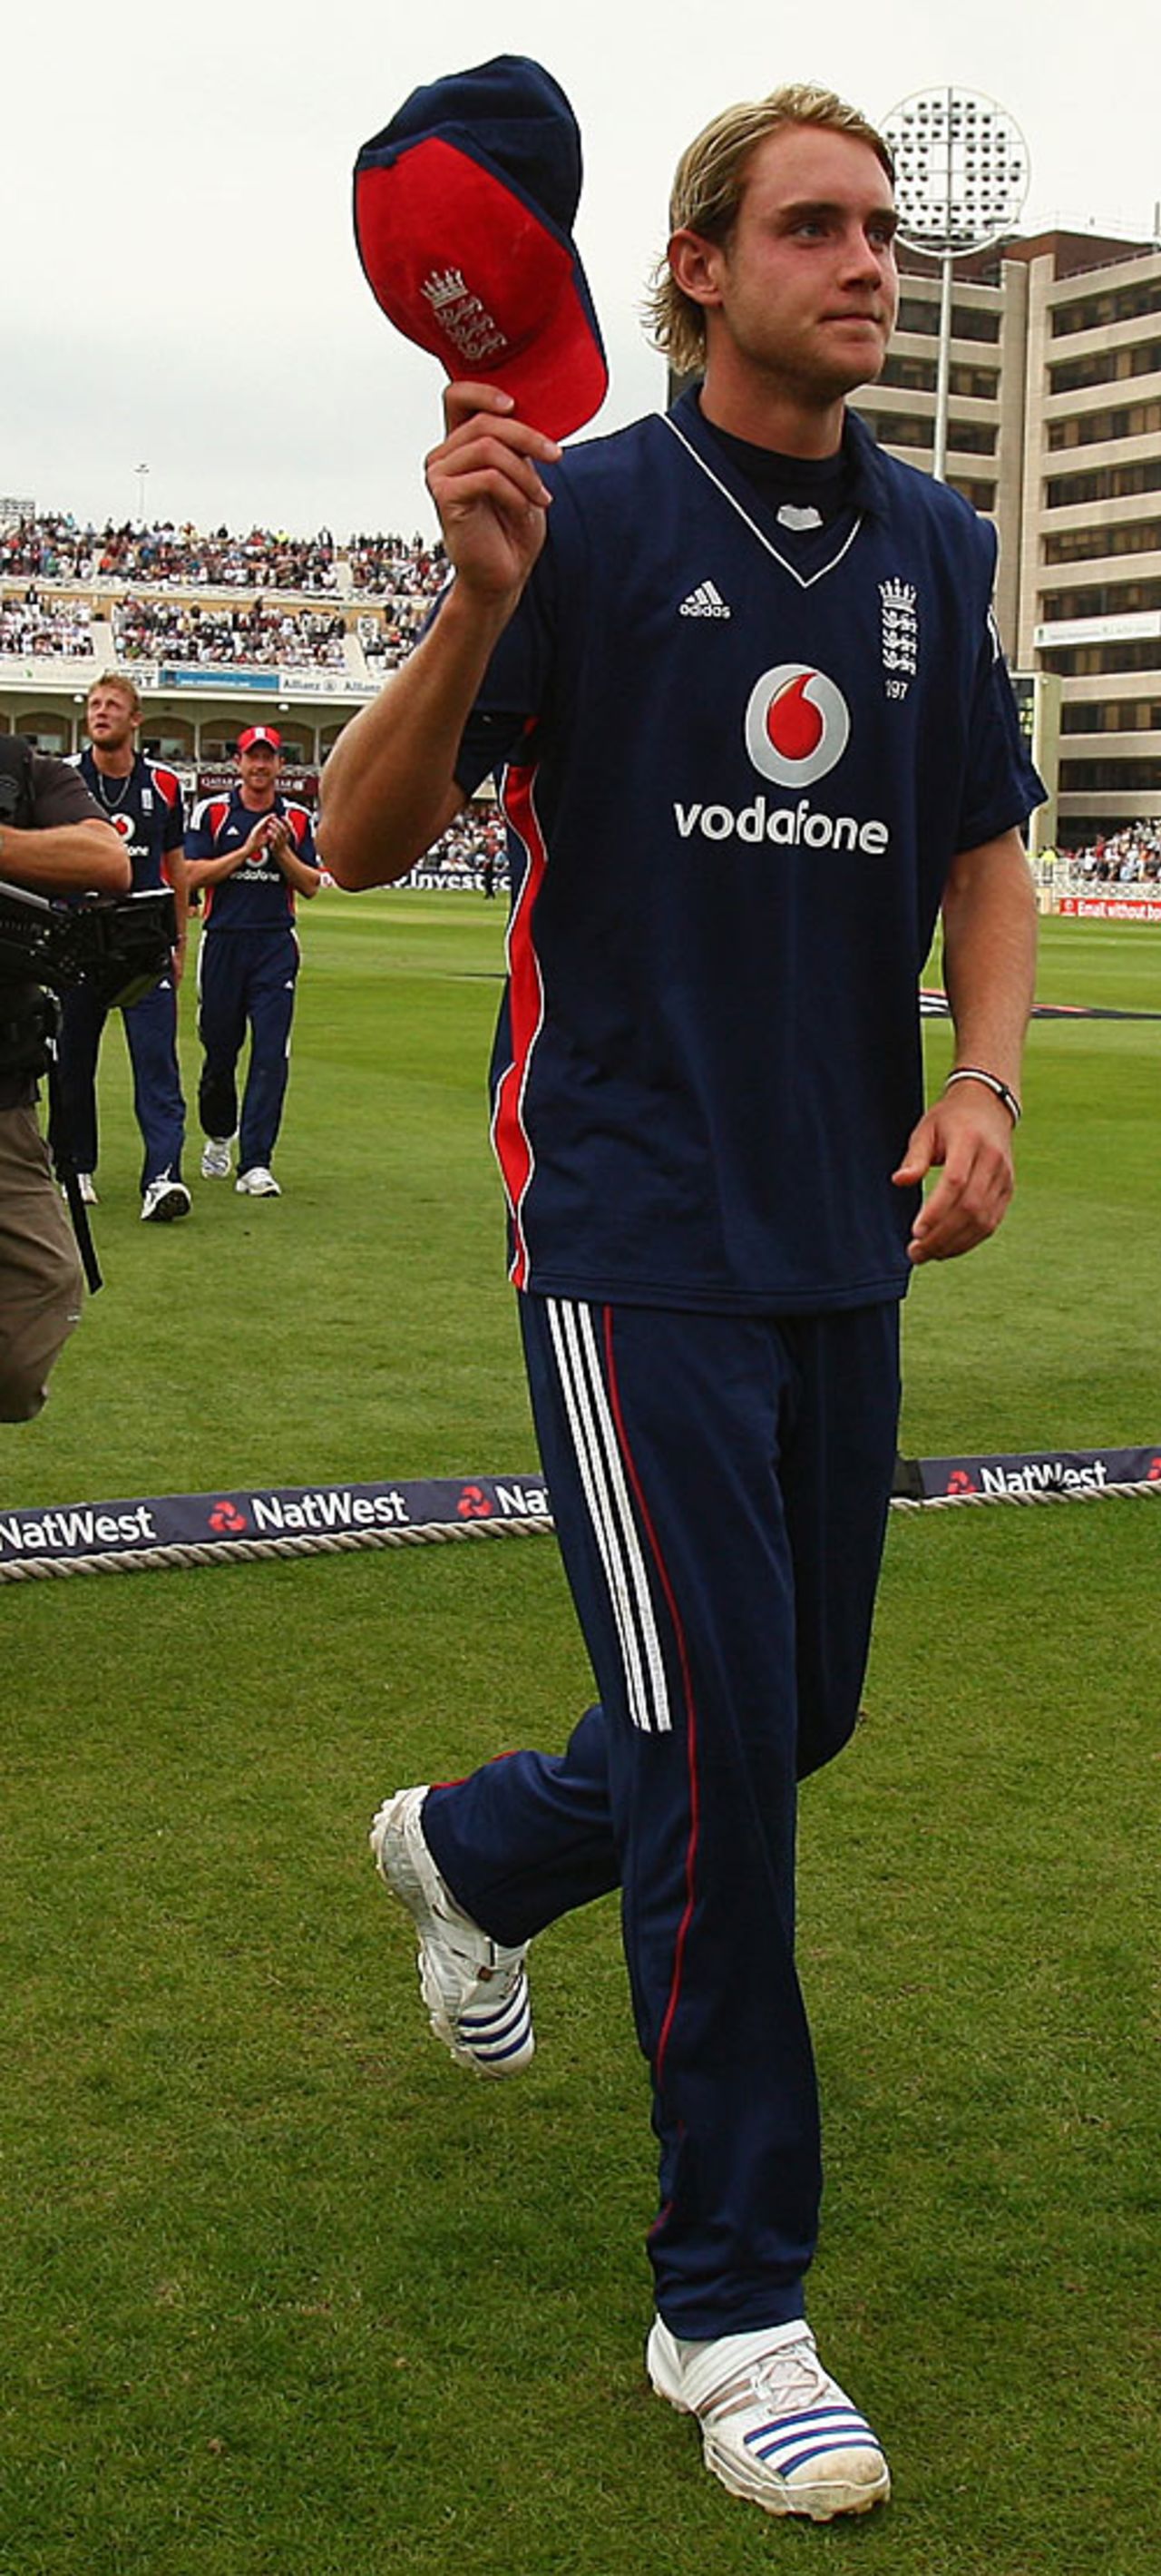 Stuart Broad doffs his cap to acknowledge the crowd after picking up his maiden five-wicket haul in ODIs, England v South Africa, 2nd ODI, Trent Bridge, August 26, 2008